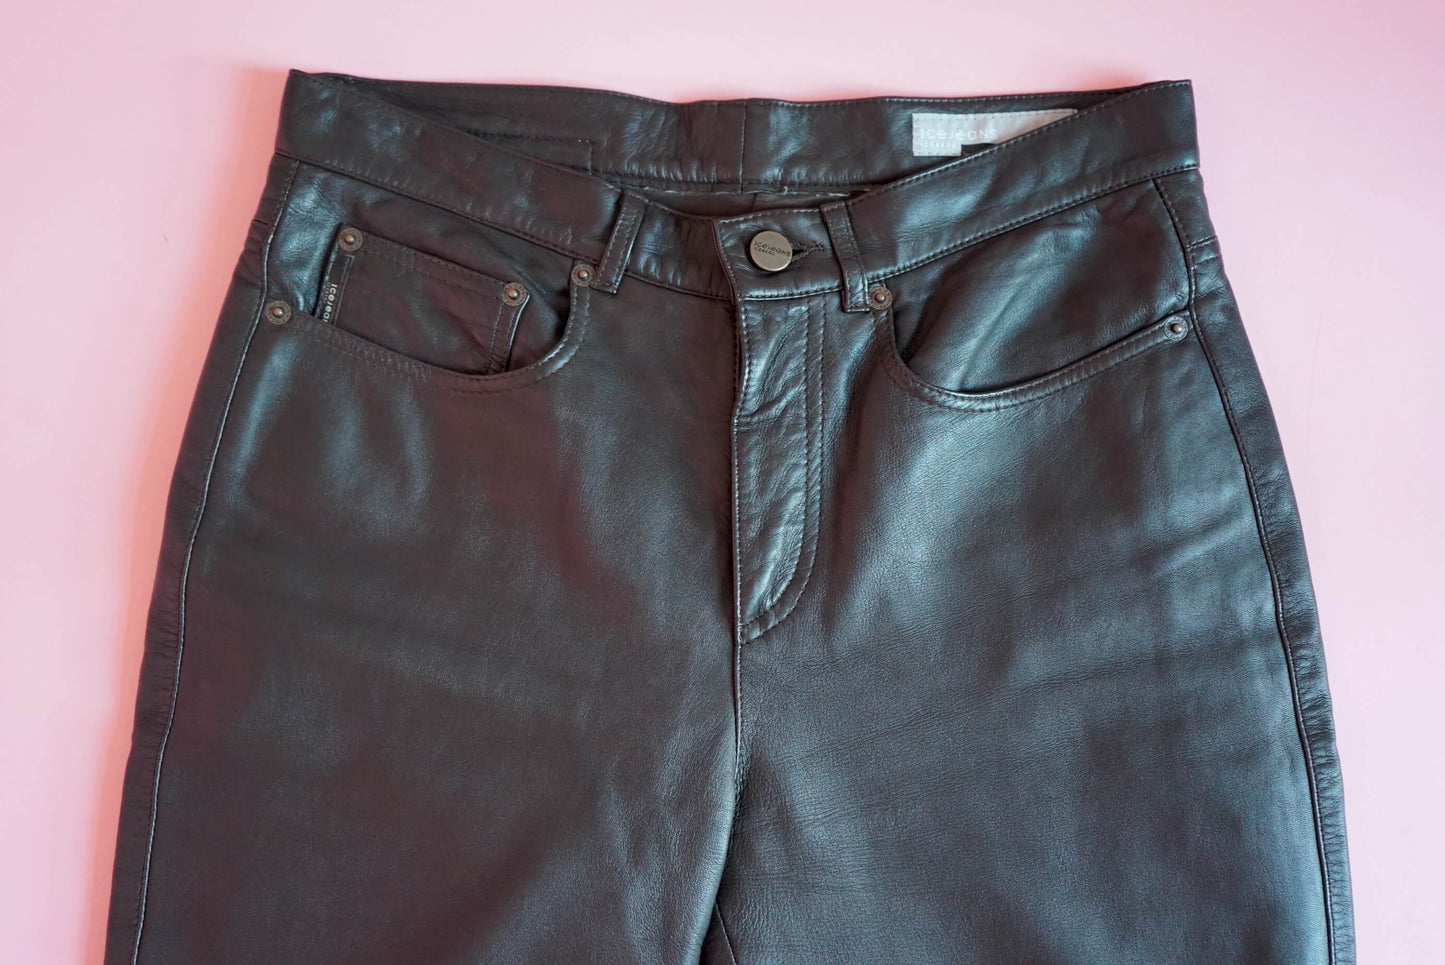 Iceberg Chocolate Brown Soft Leather Trousers Size S